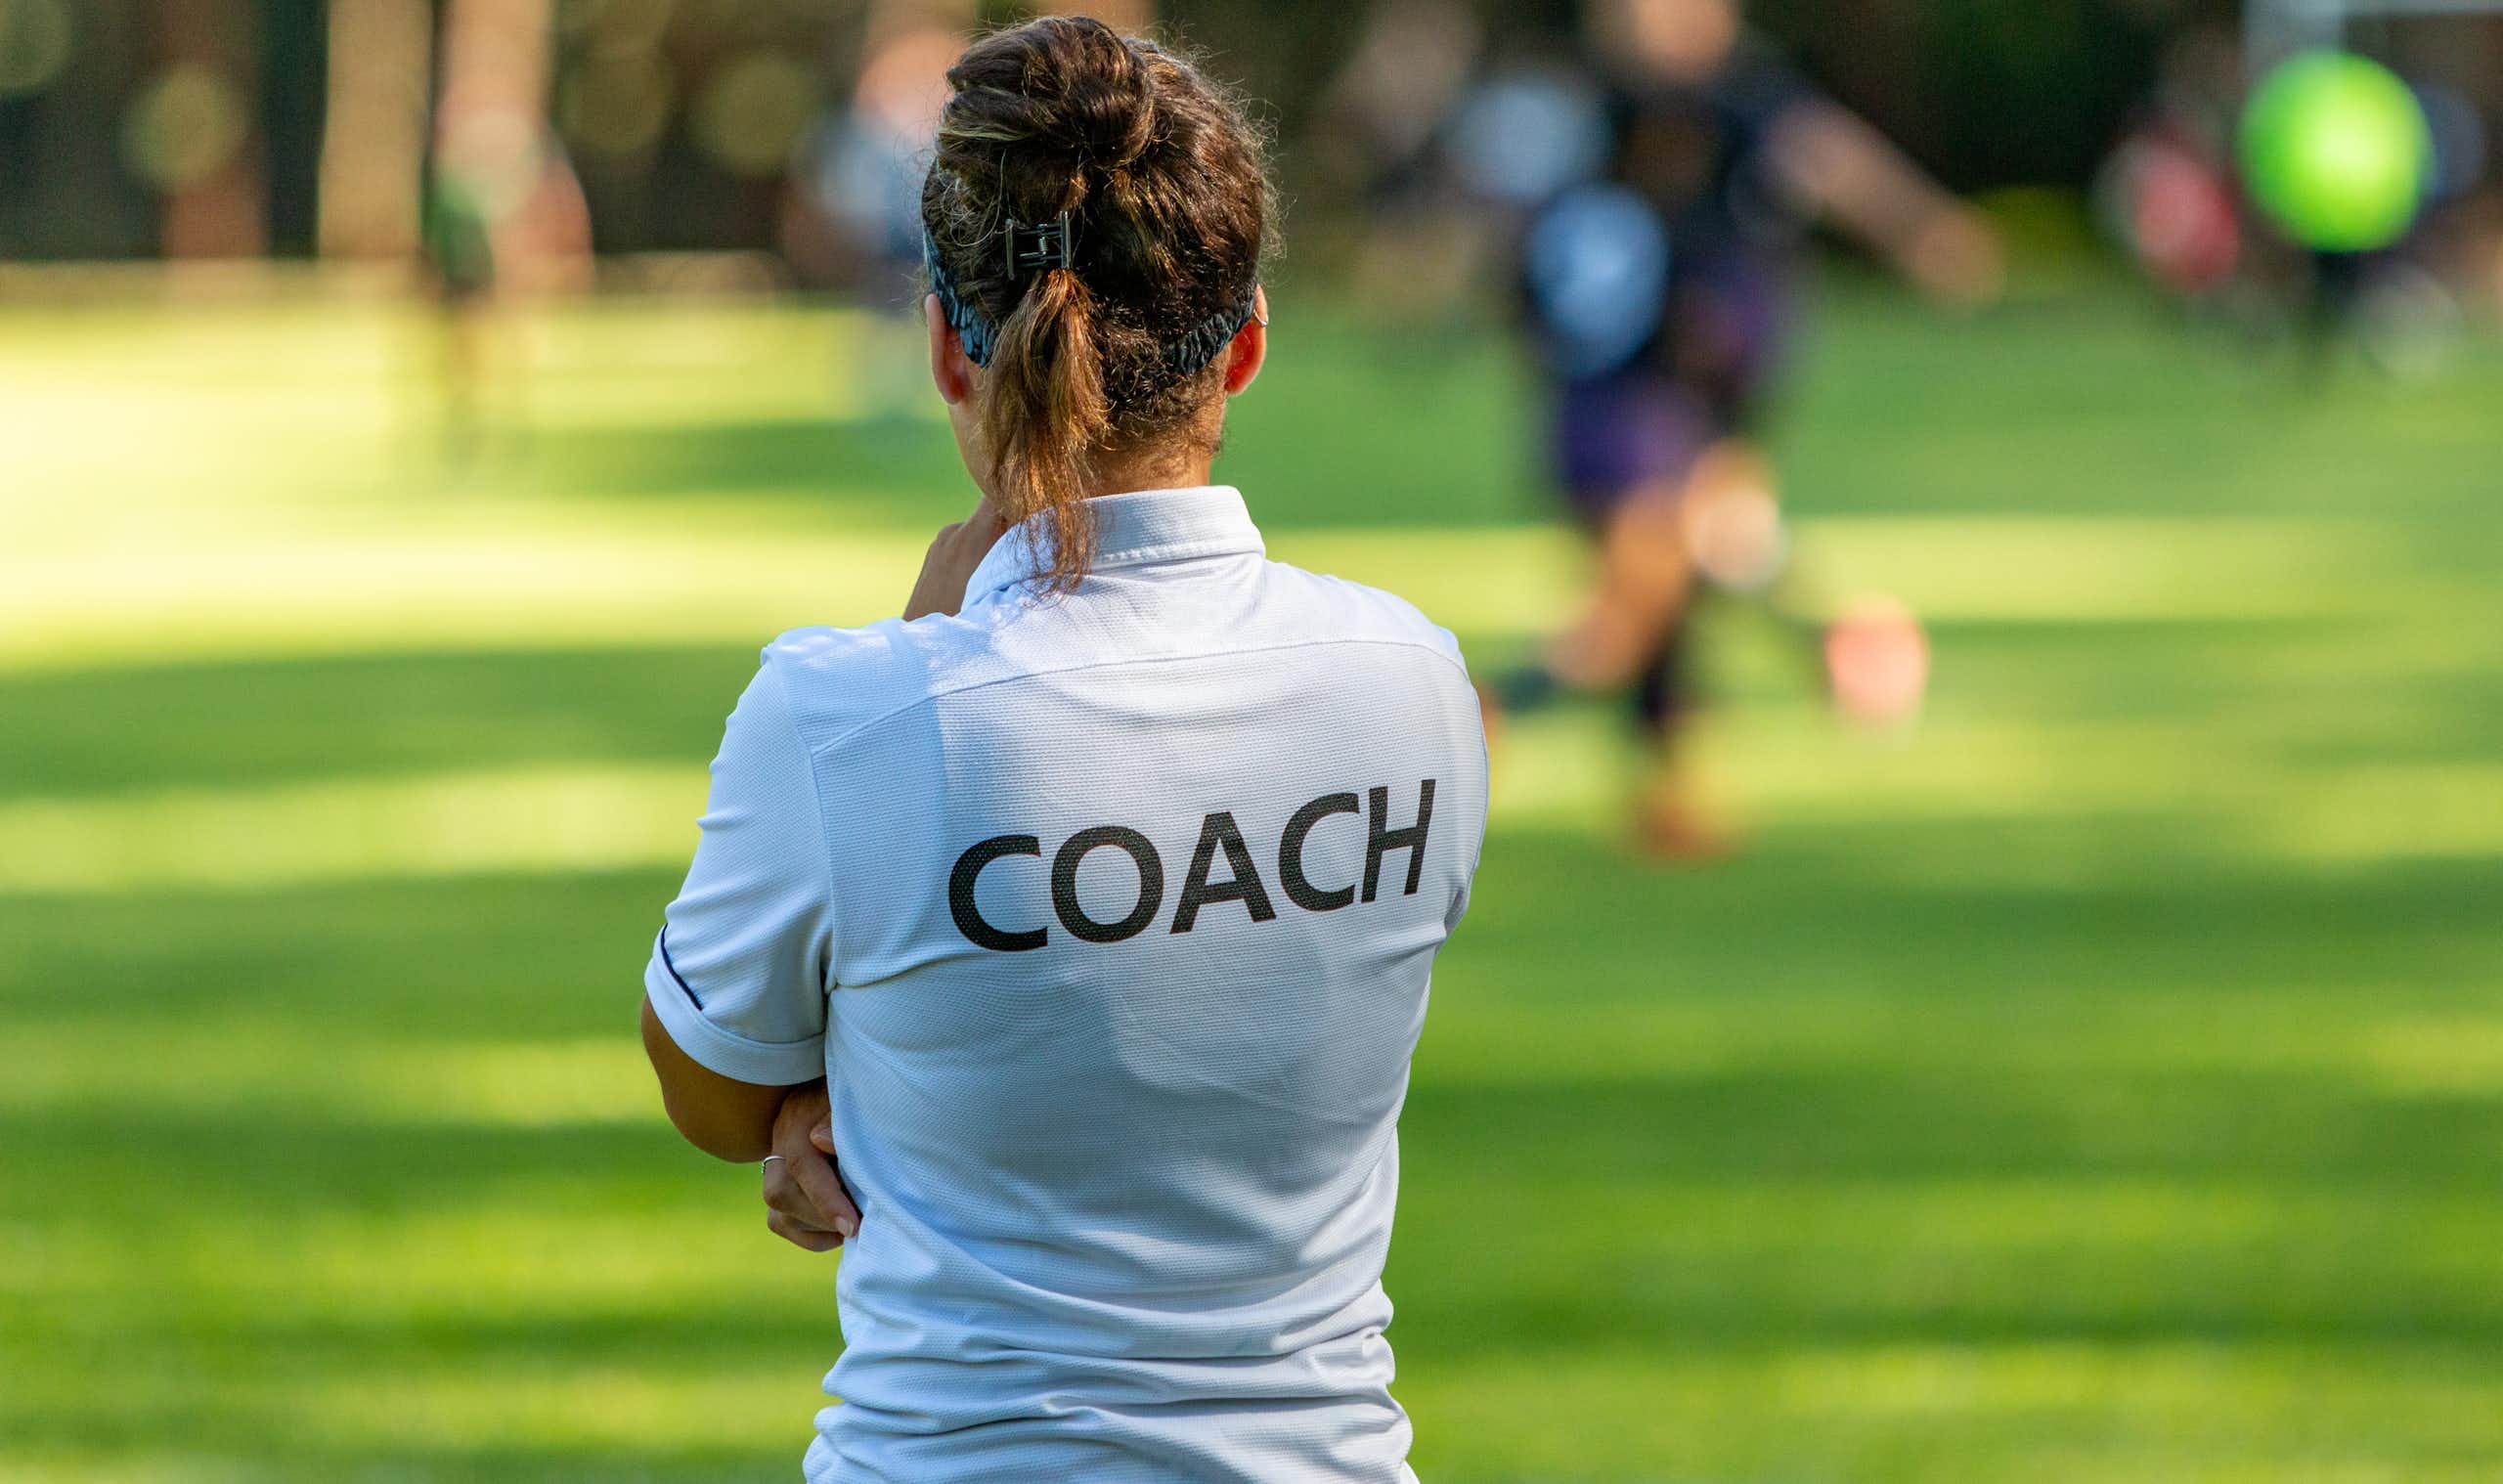 A women wearing a white t-shirt with the word 'Coach' on the back faces a soccer game